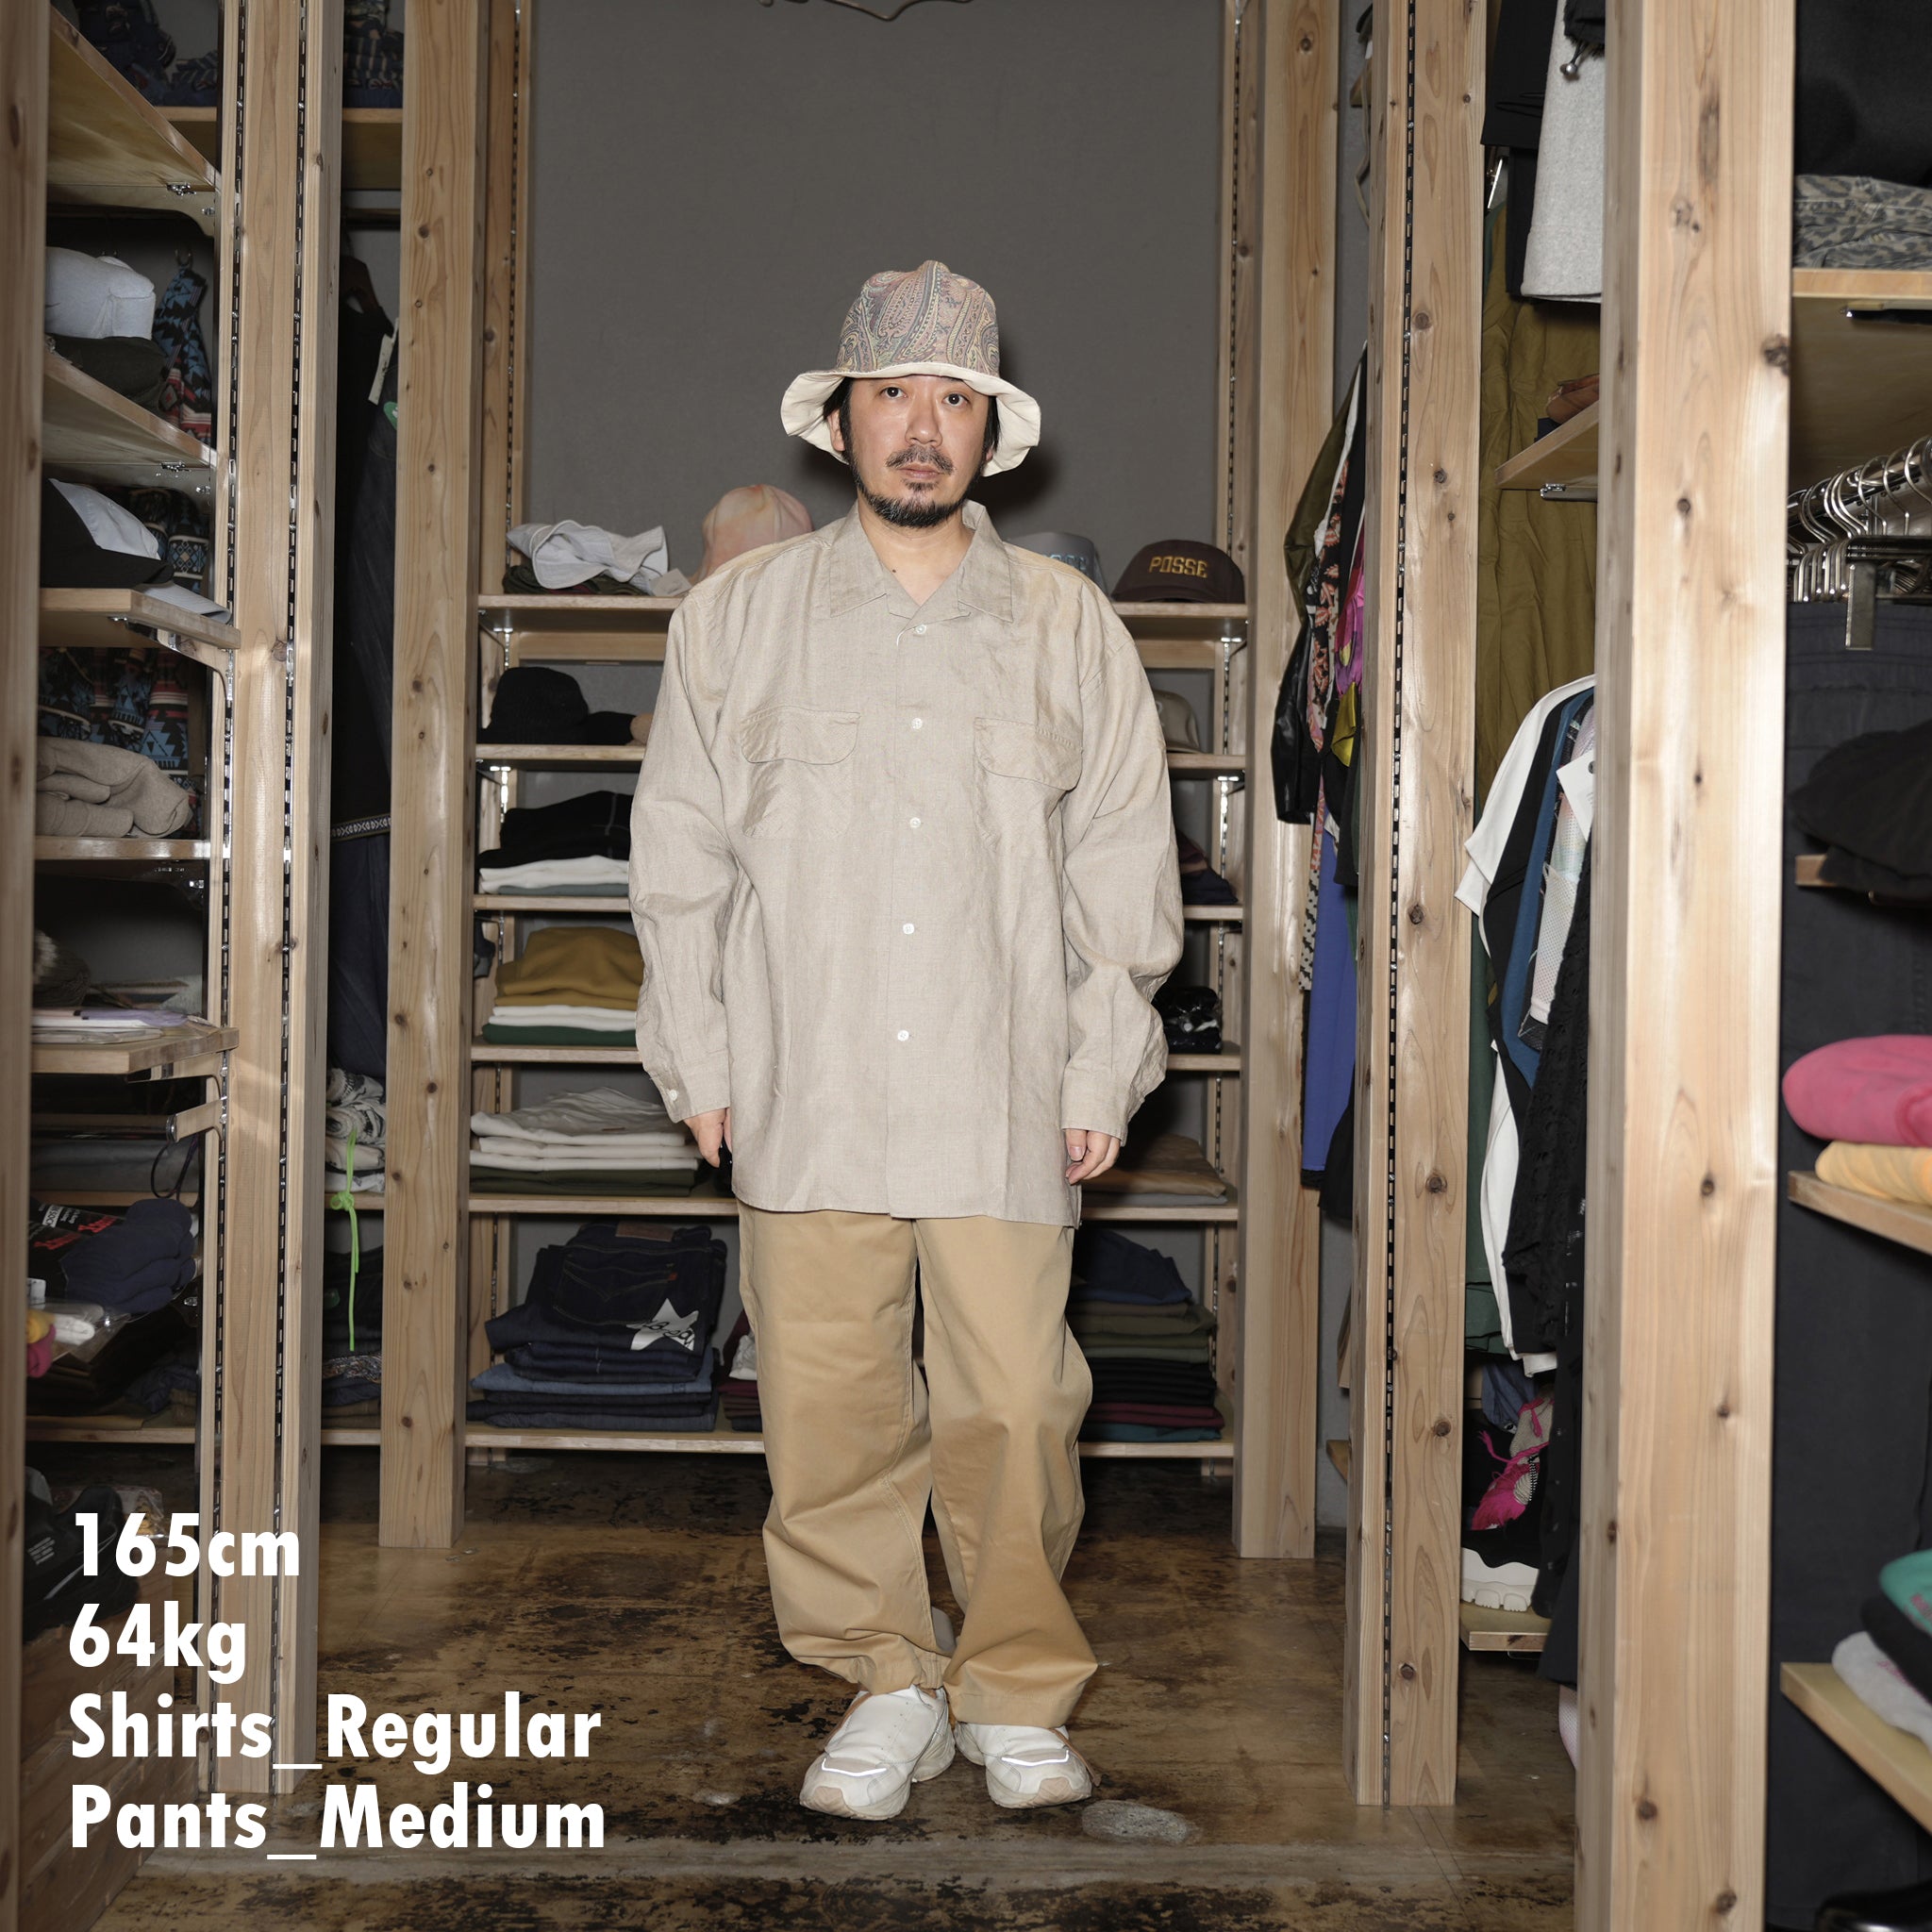 Name: CAMP COLLAR SHIRT | Color:BEIGE LINEN | Size:Regular/Tall 【CITYLIGHTS PRODUCTS_シティライツプロダクツ】